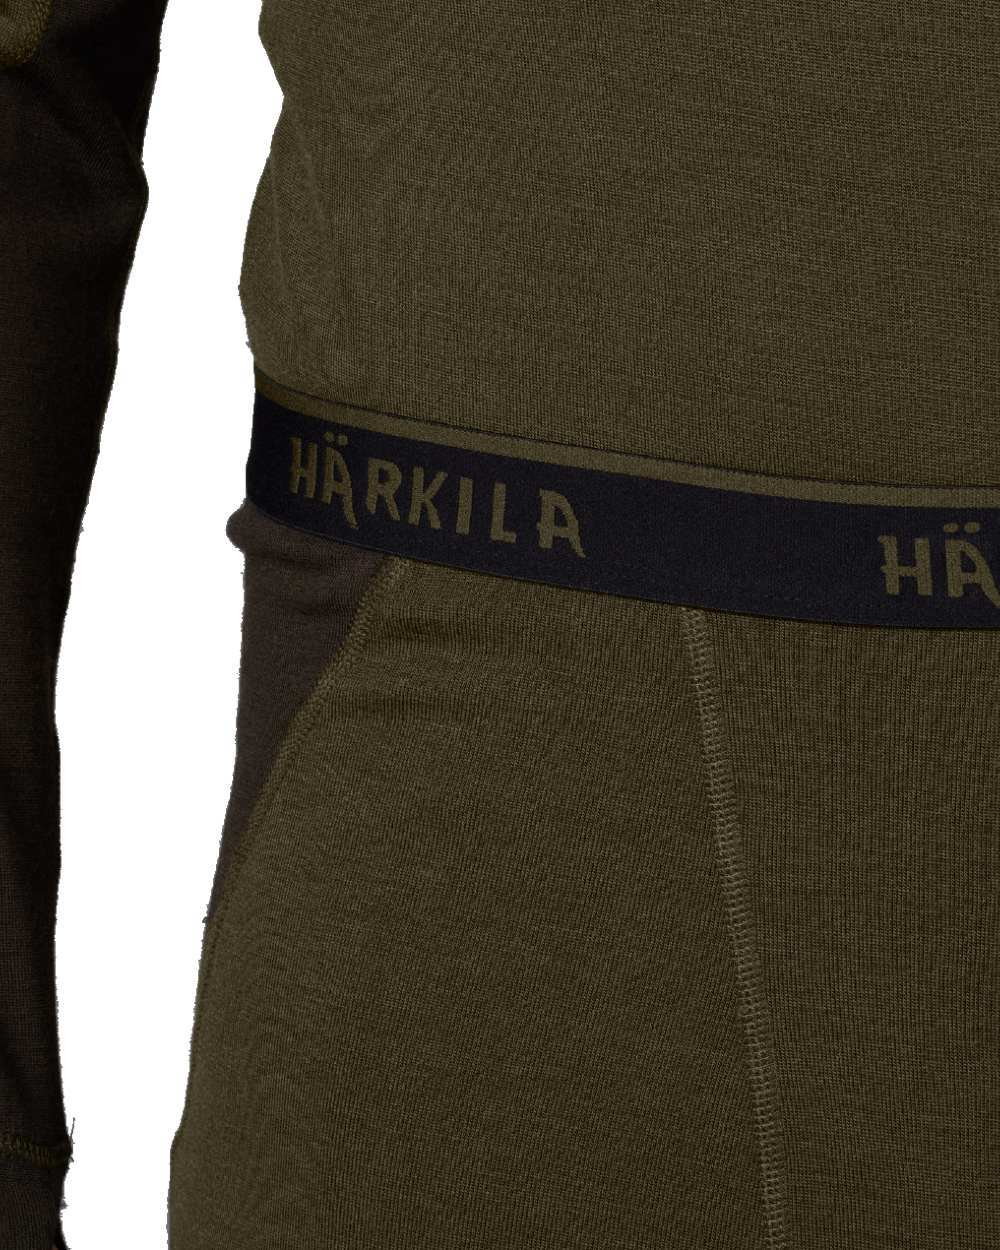 Willow Green/Shadow Brown coloured Harkila Base Warm Long Johns on white bachground 